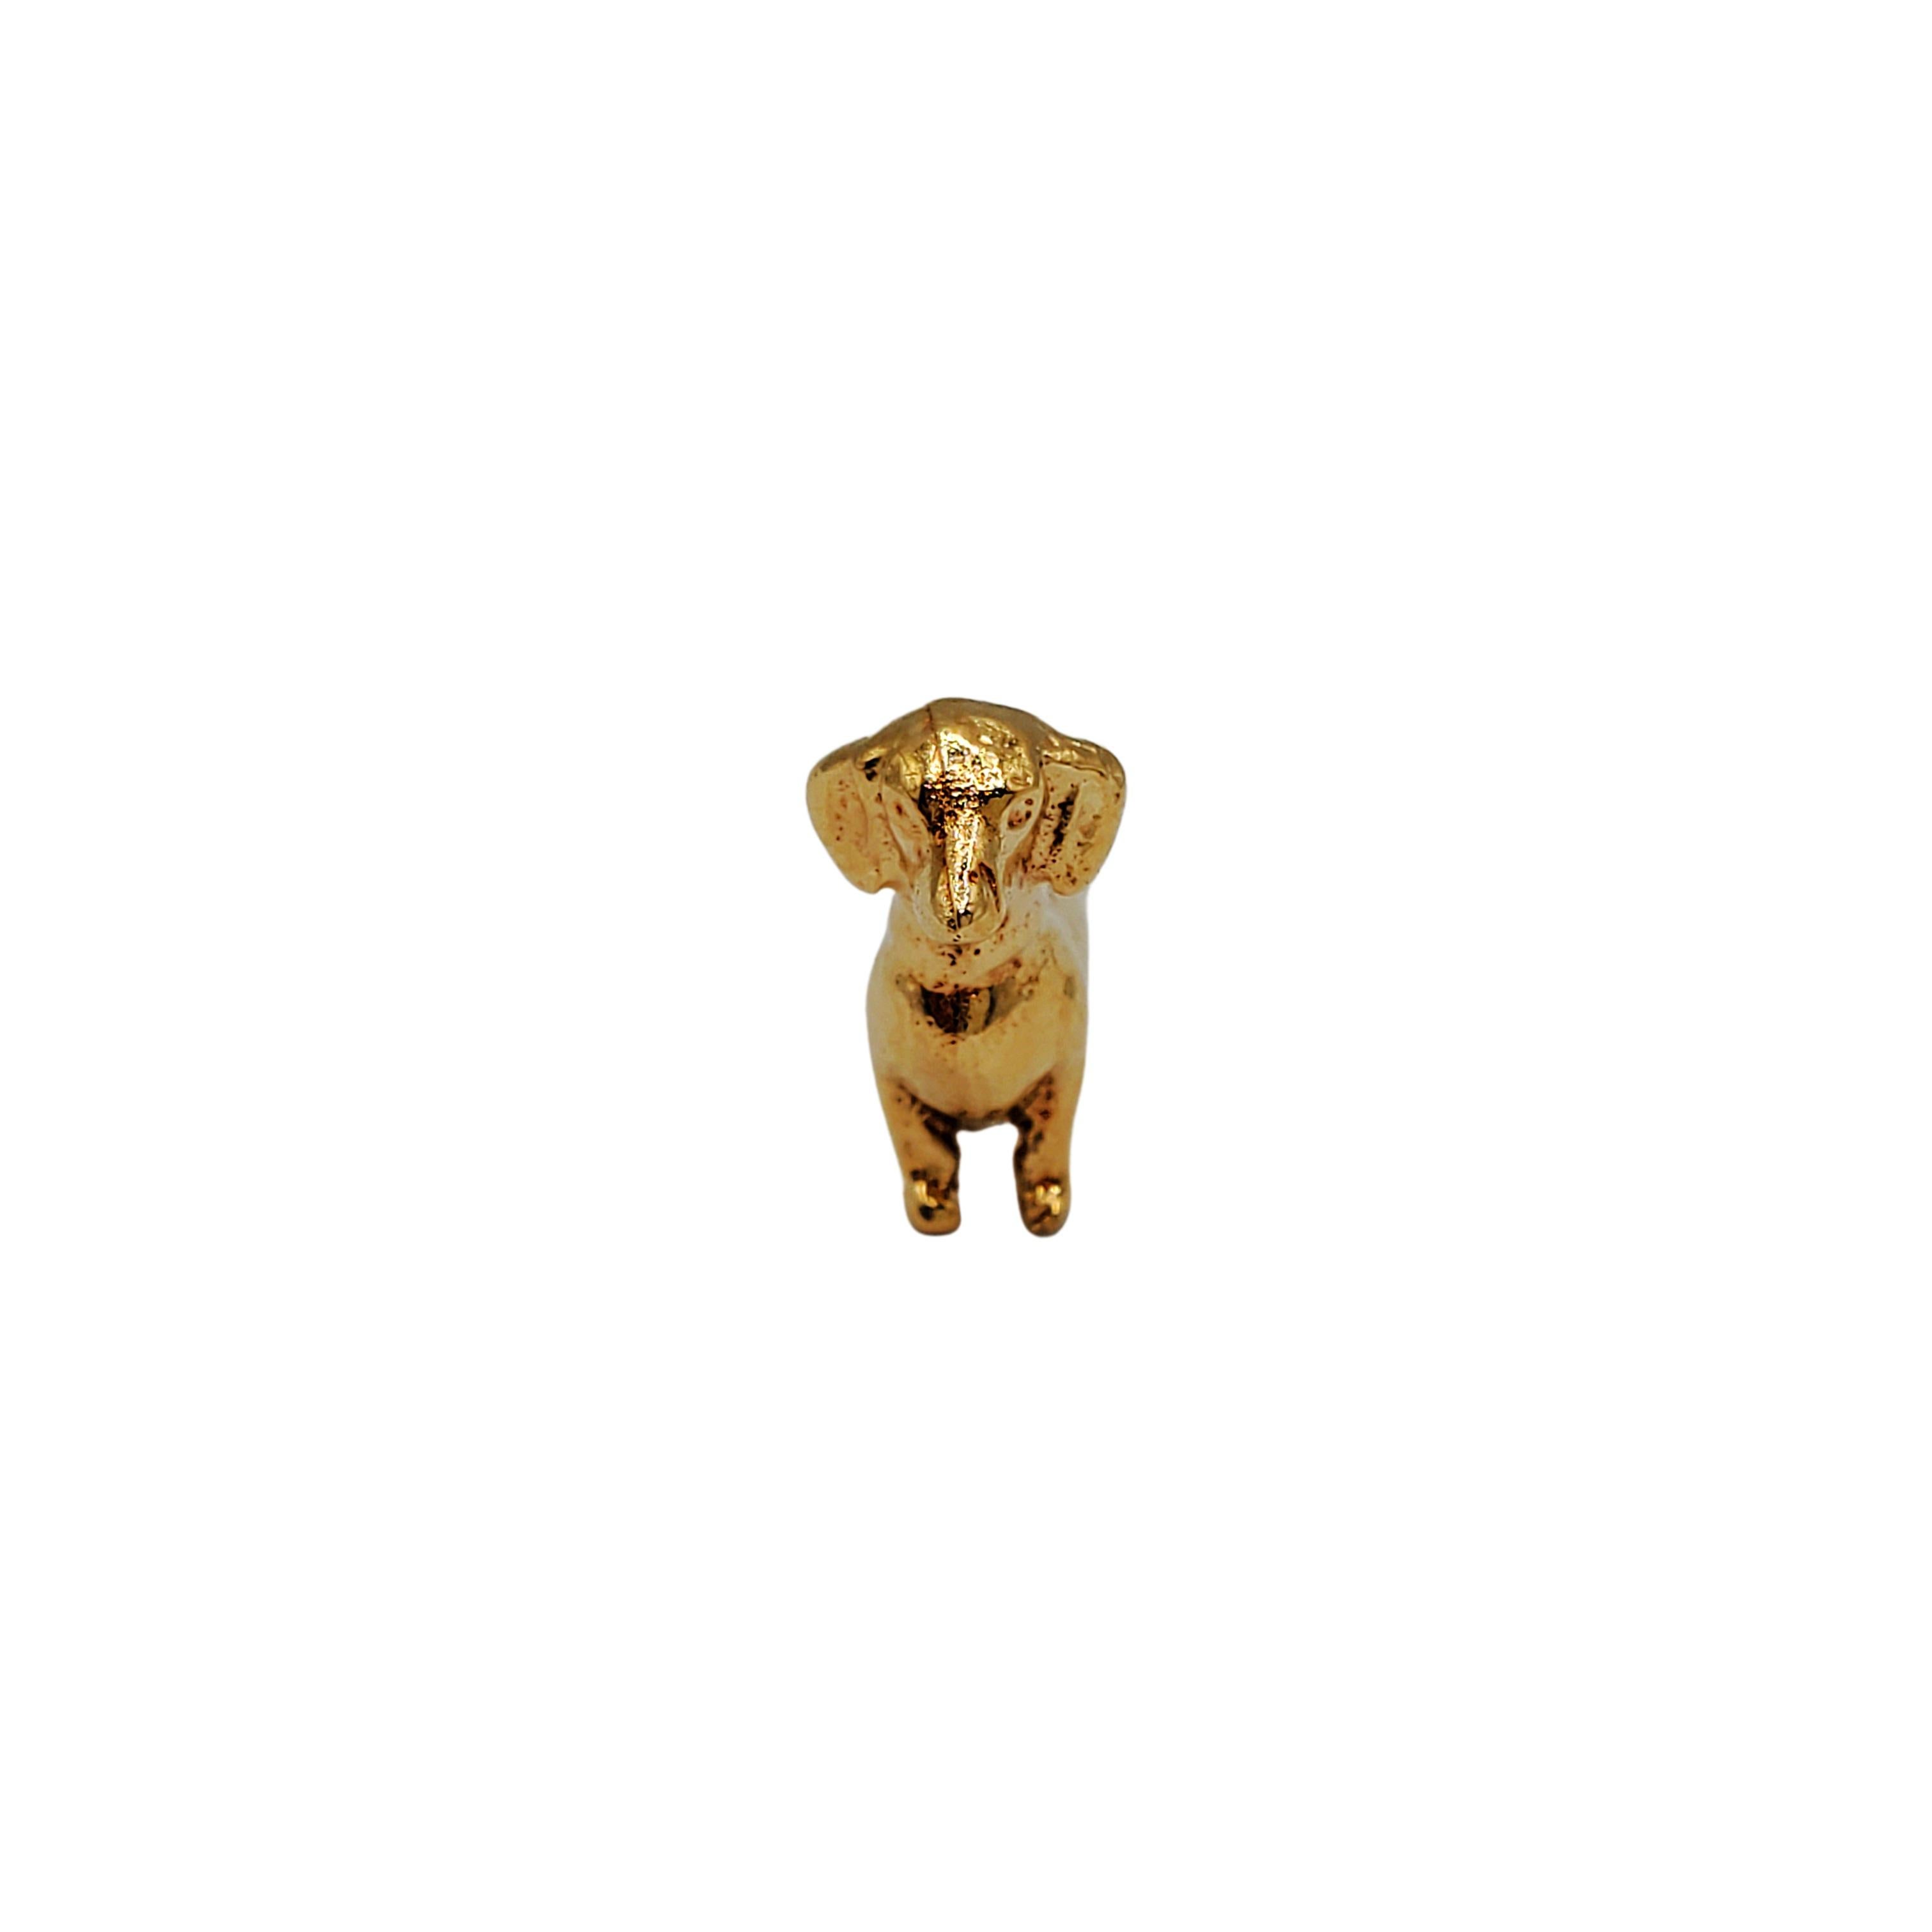 14K Yellow Gold Dachshund Charm

Adorable 3D Dachshund Charm beautifully crafted in 14K yellow gold, this charm can become the perfect gift for any dog lover!

Size: 13mm X 11mm

Weight: 2.6 gr / 1.6 dwt

Hallmark: 14K

Very good condition,